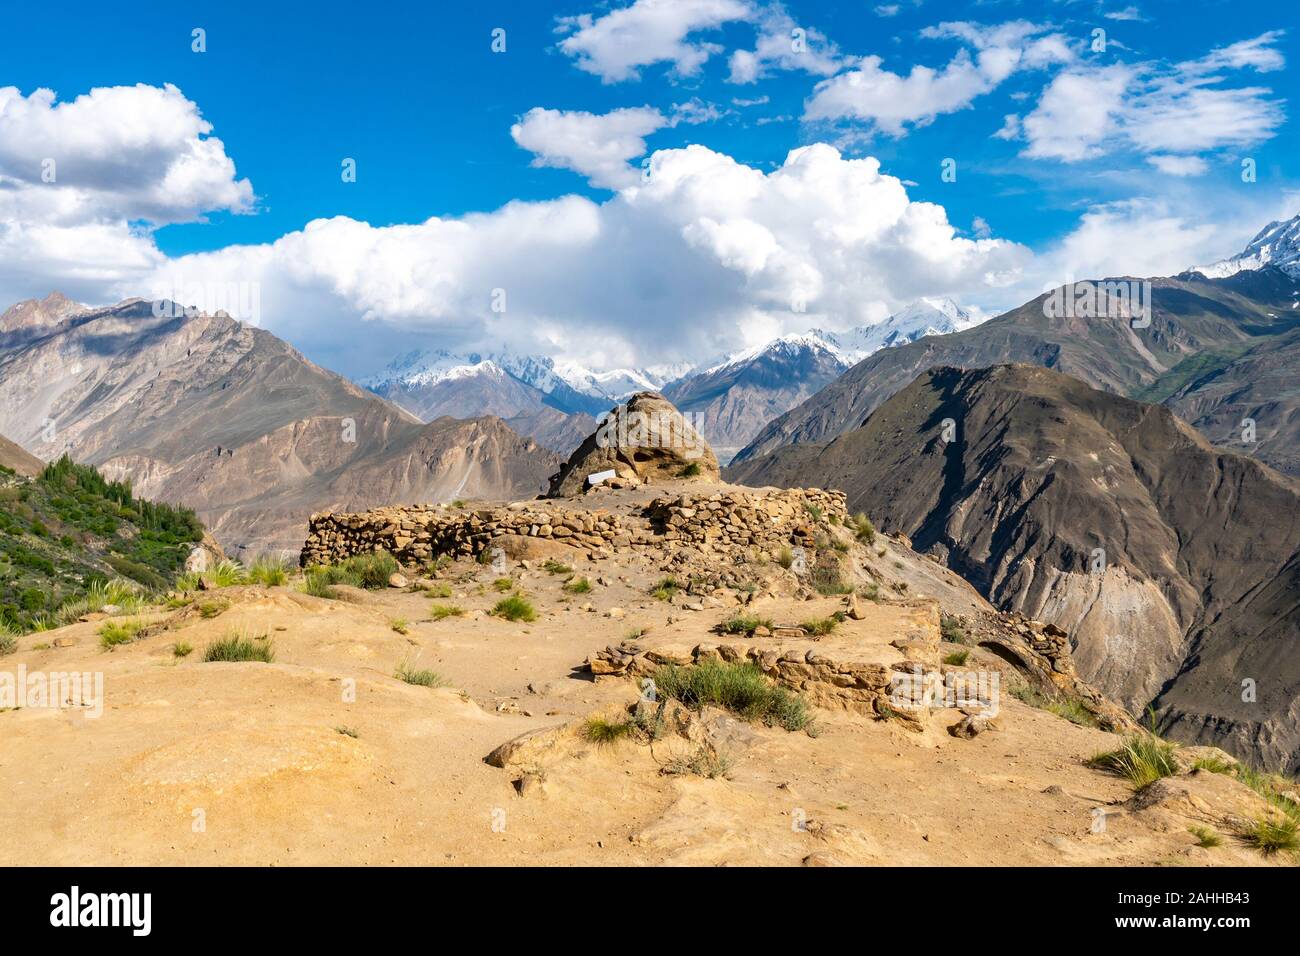 Karimabad Eagle's Nest Picturesque Panoramic View of the Snow Capped Mountains and Landscape on a Sunny Blue Sky Day Stock Photo